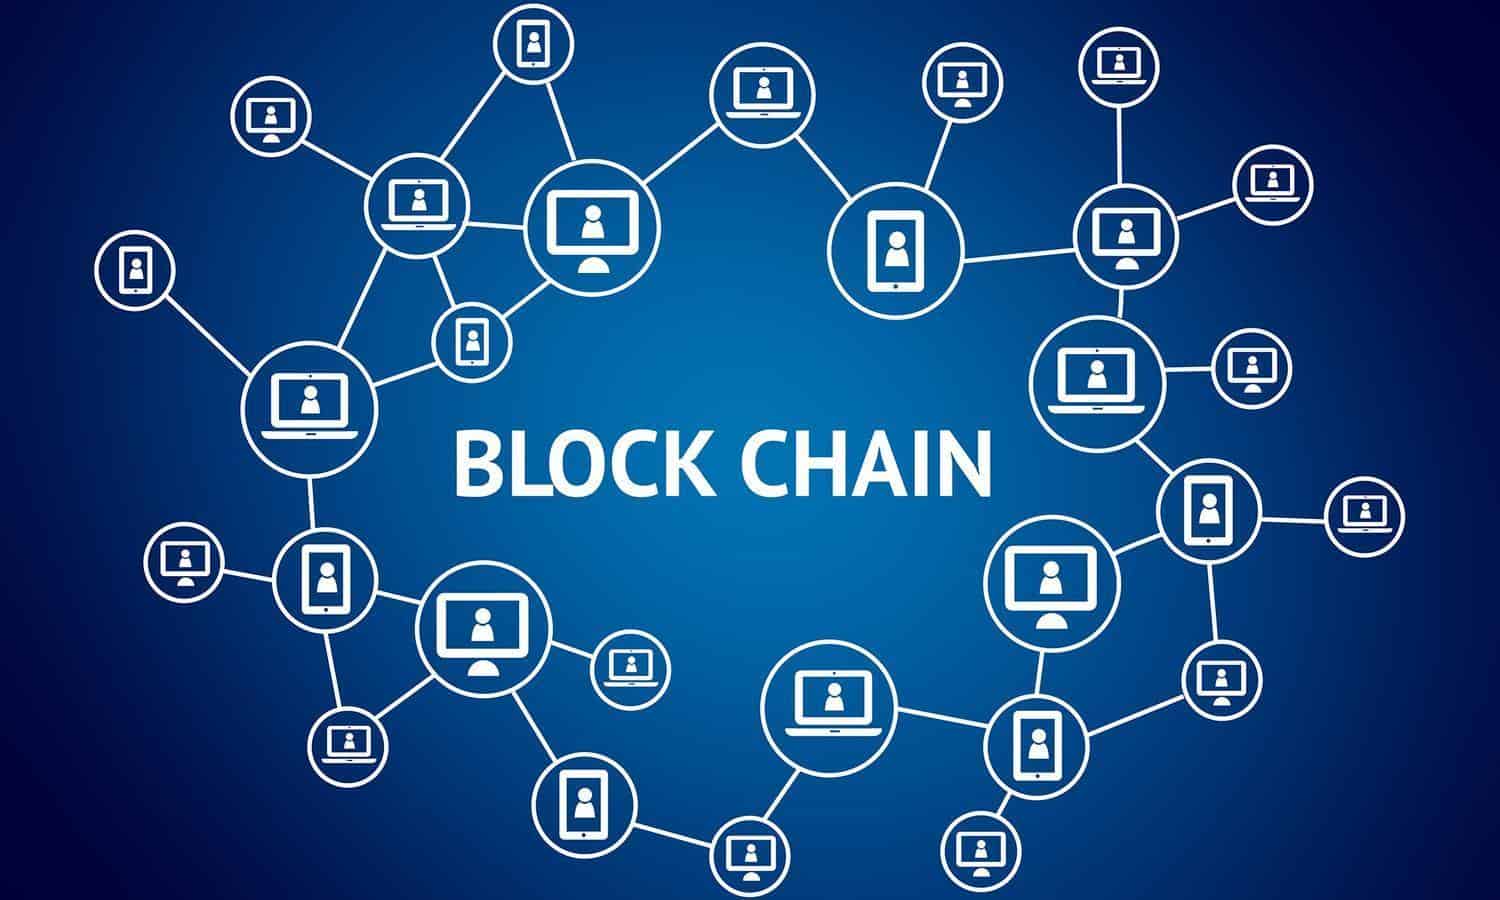 Multi-chain, cross-chain interoperability and composability explained